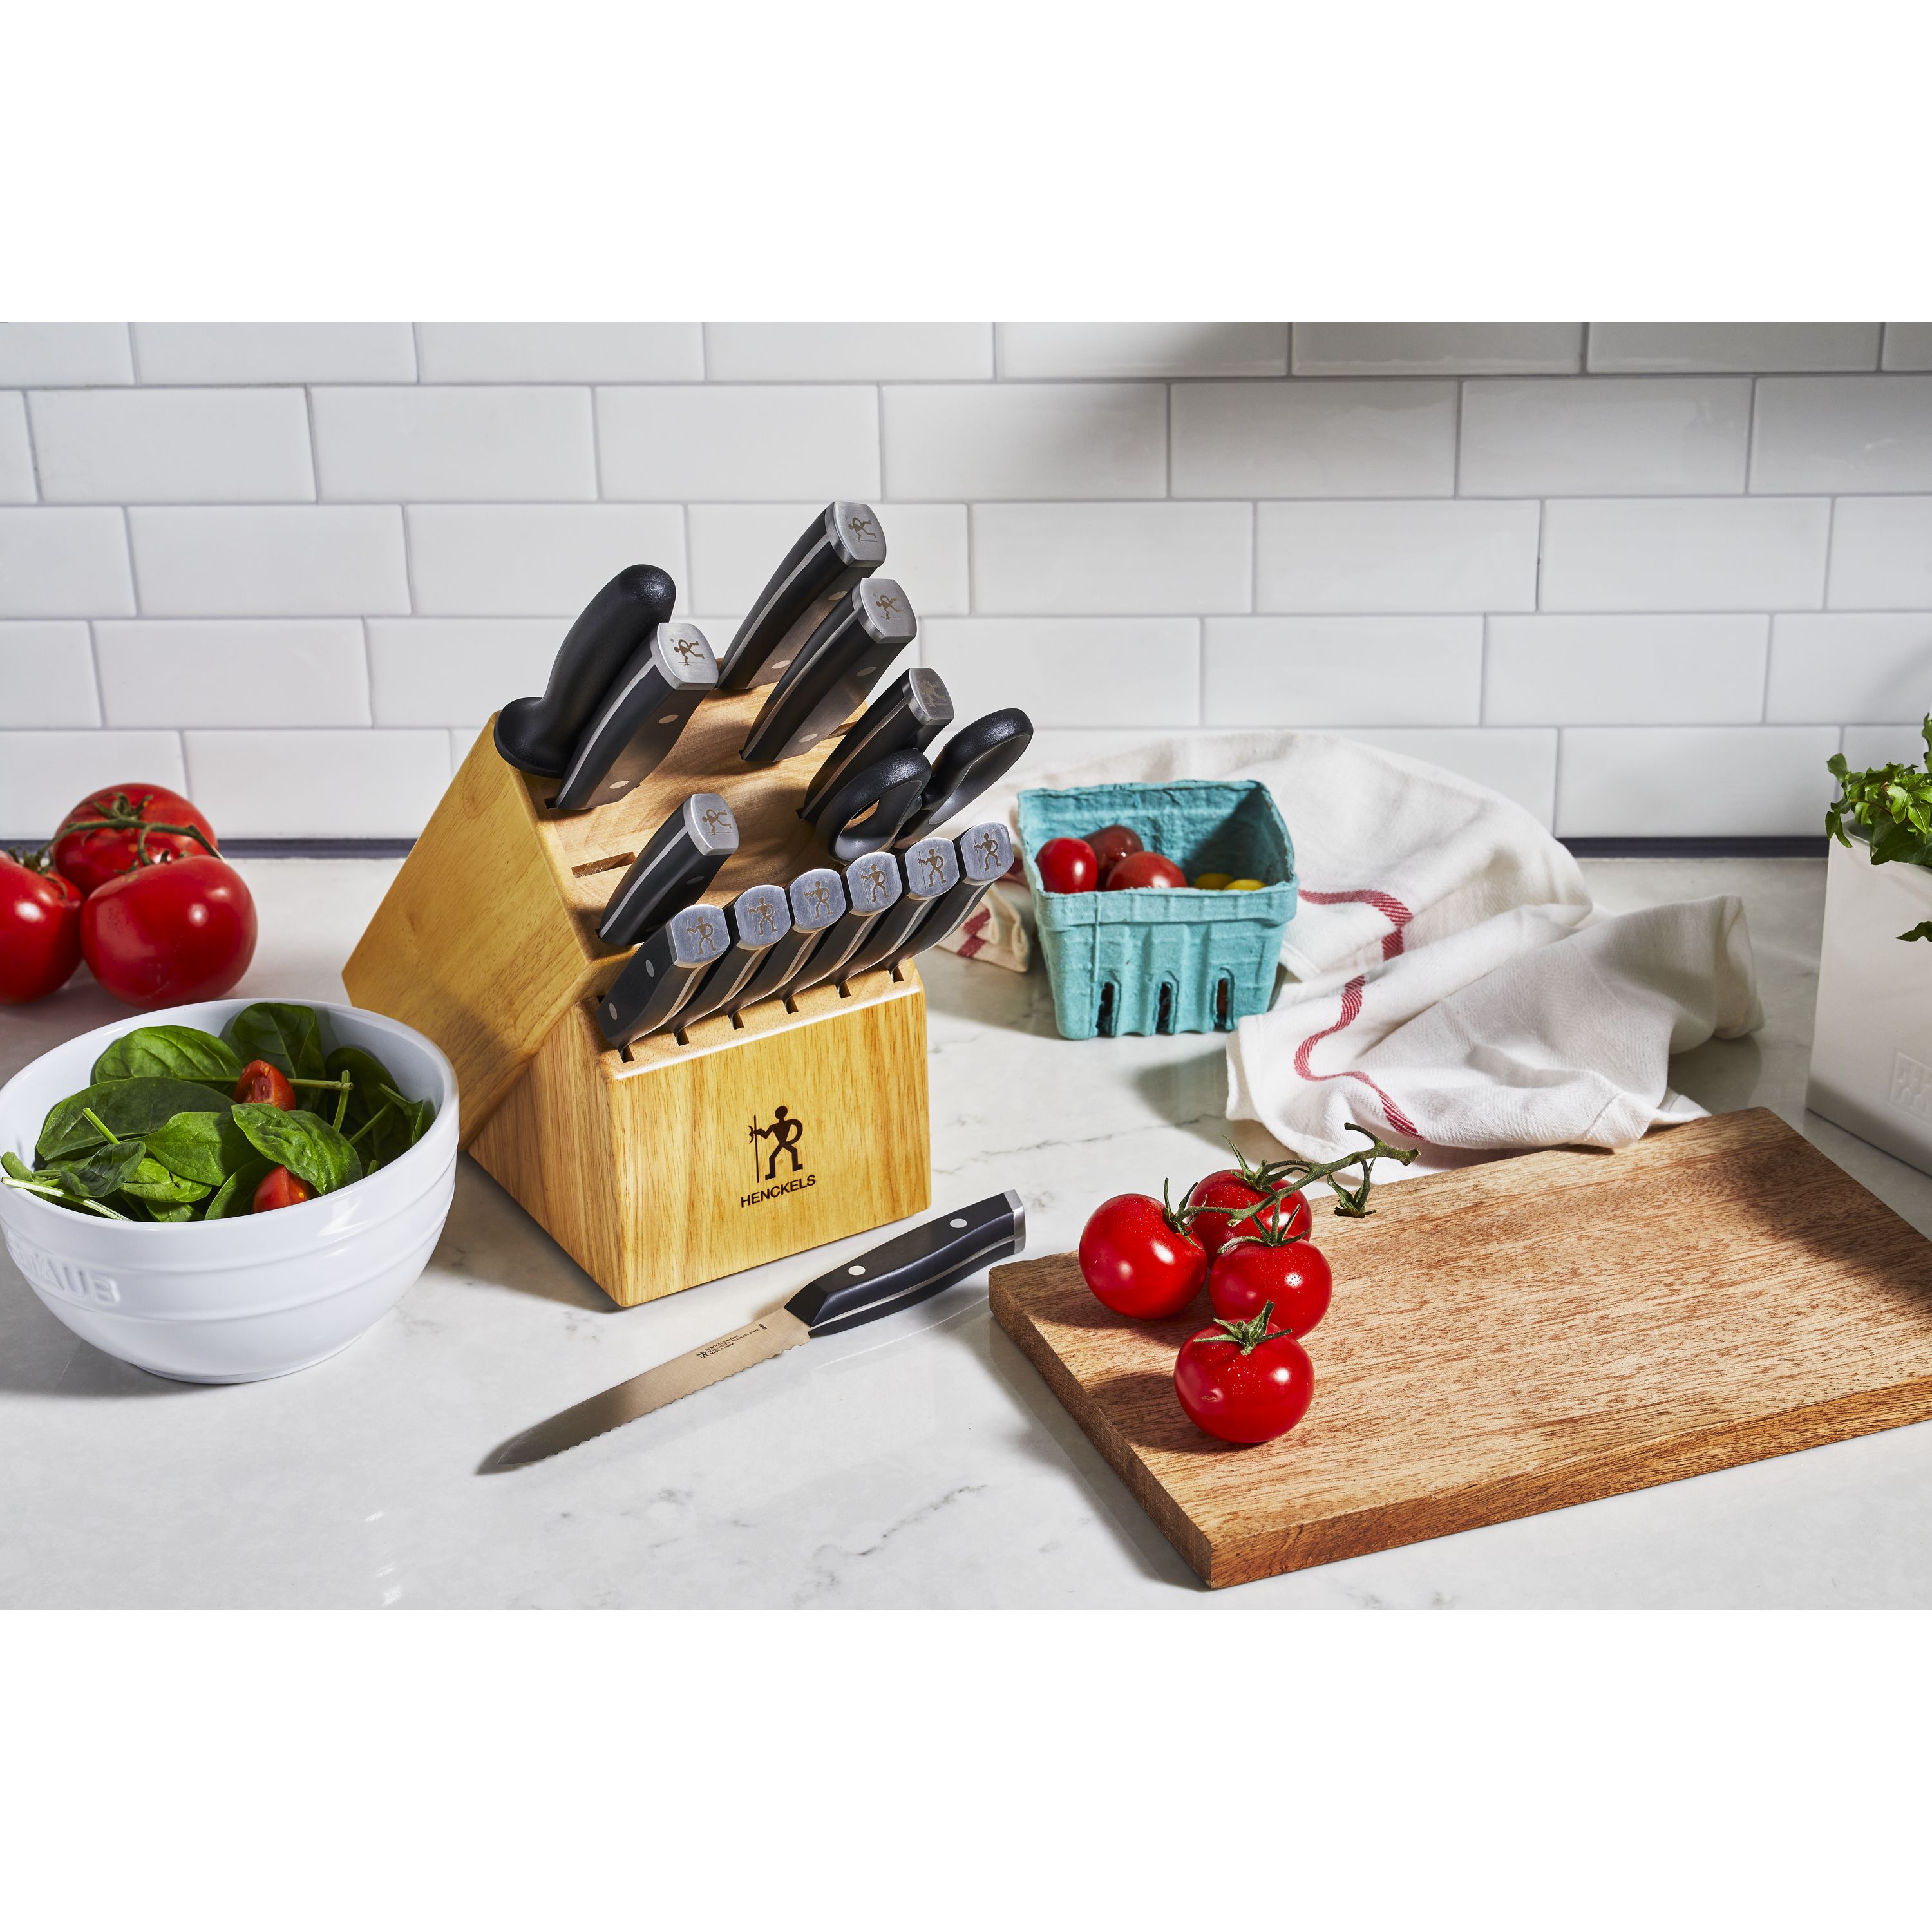 Costco Sale Item Review Henckels 3 Piece Cutting Board Set (Also